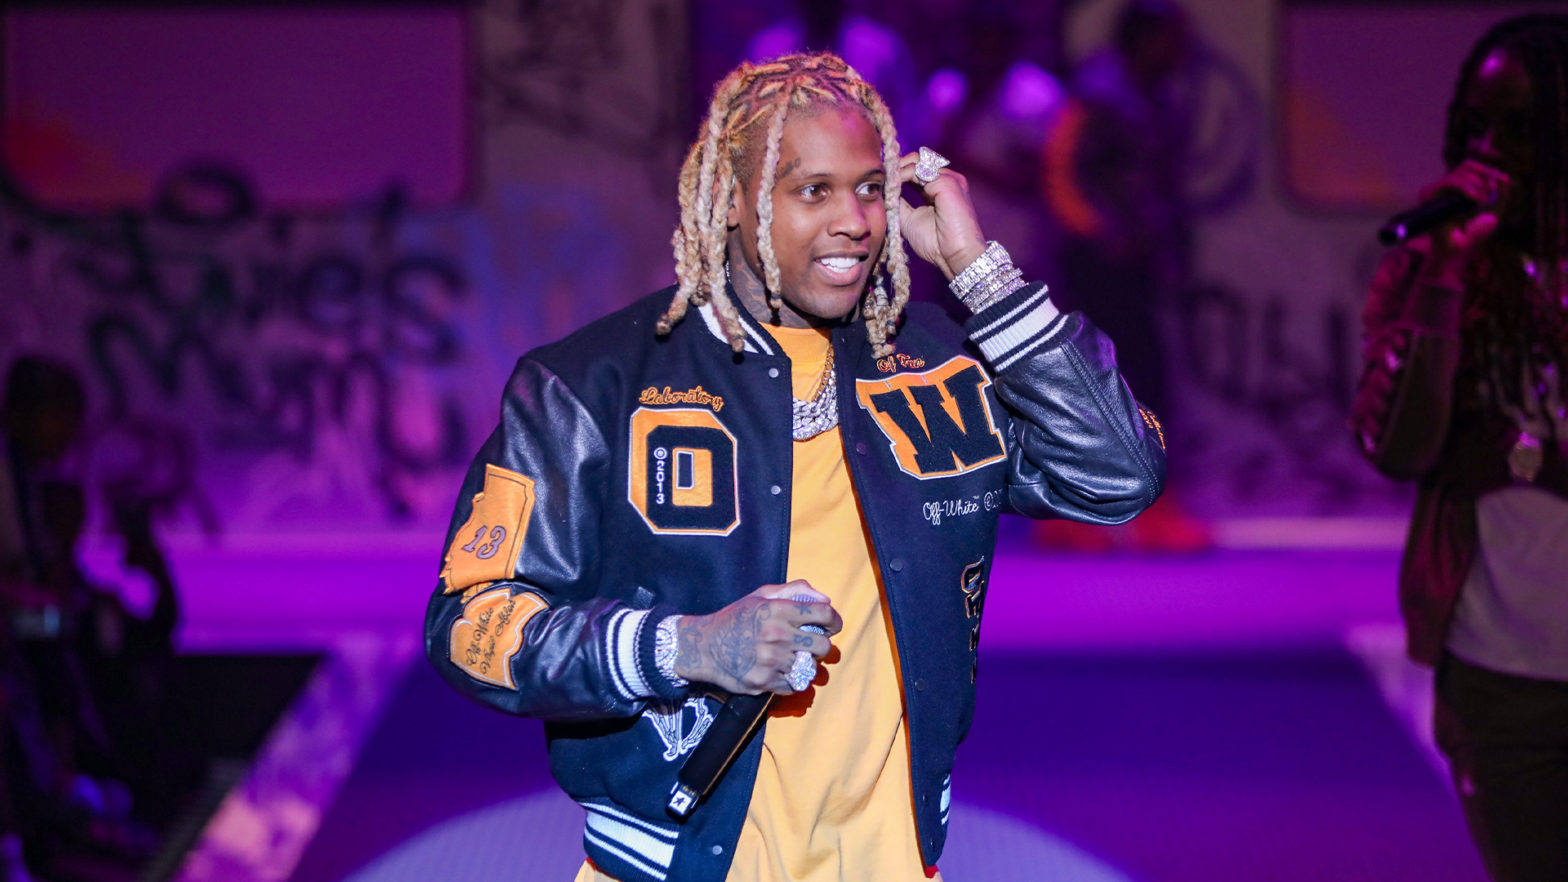 Lil Durk's Lucrative Grand Theft Auto V Server Placed On Pause By Rockstar Games